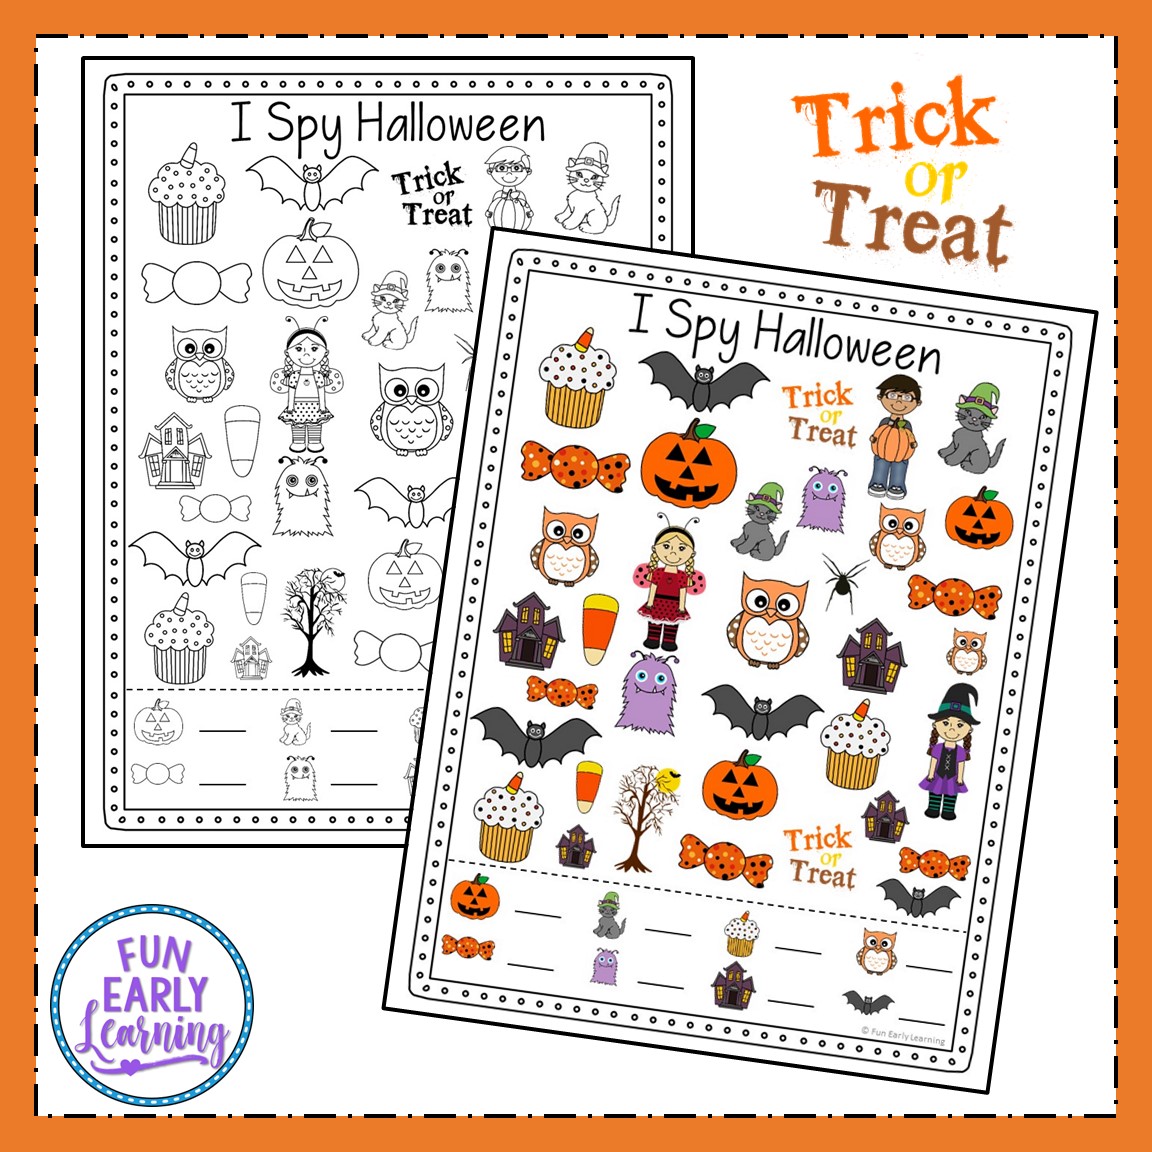 I Spy Halloween Free Printable for Matching and Counting